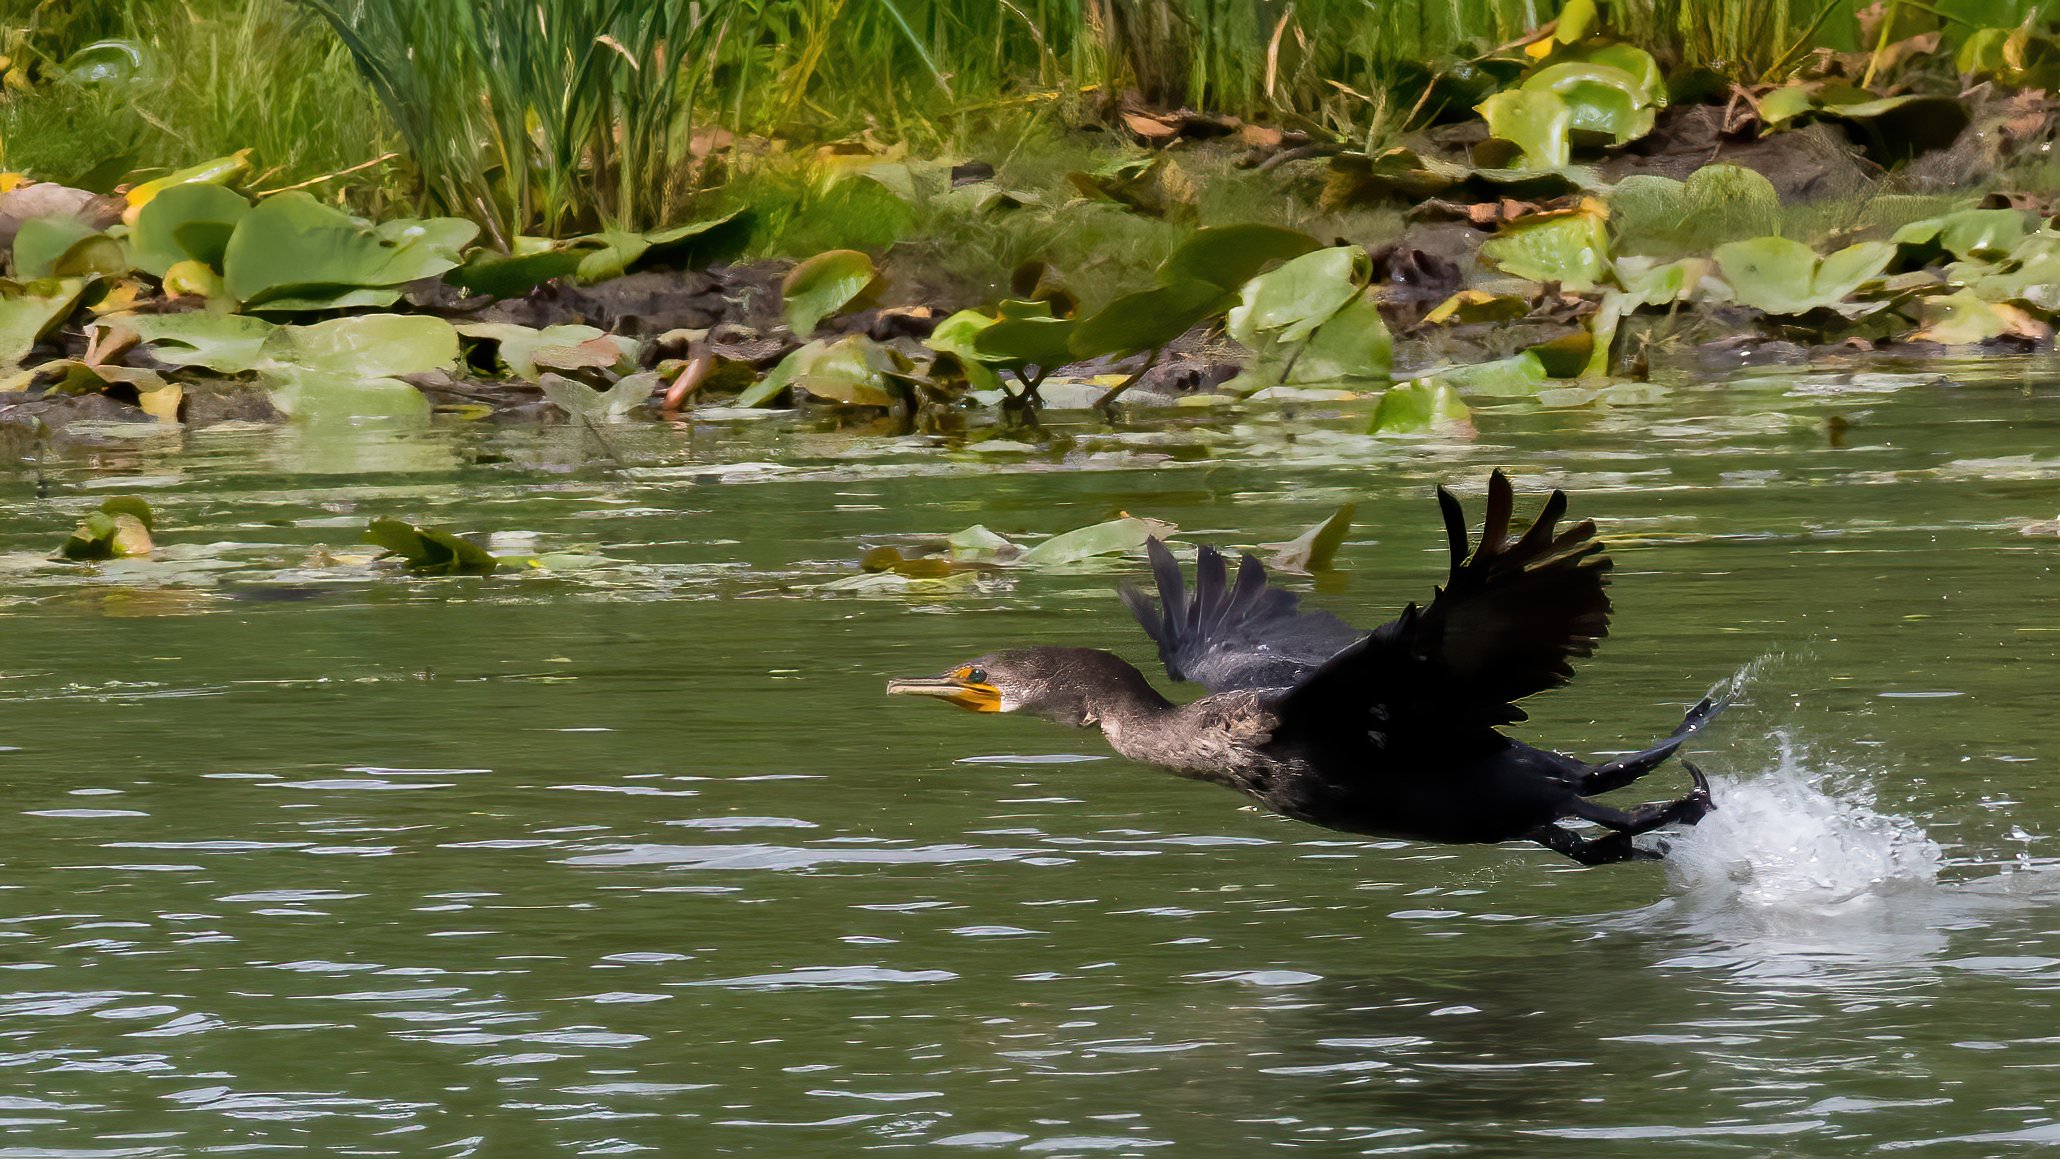 08 A double crested cormorant takes off from the water.jpg